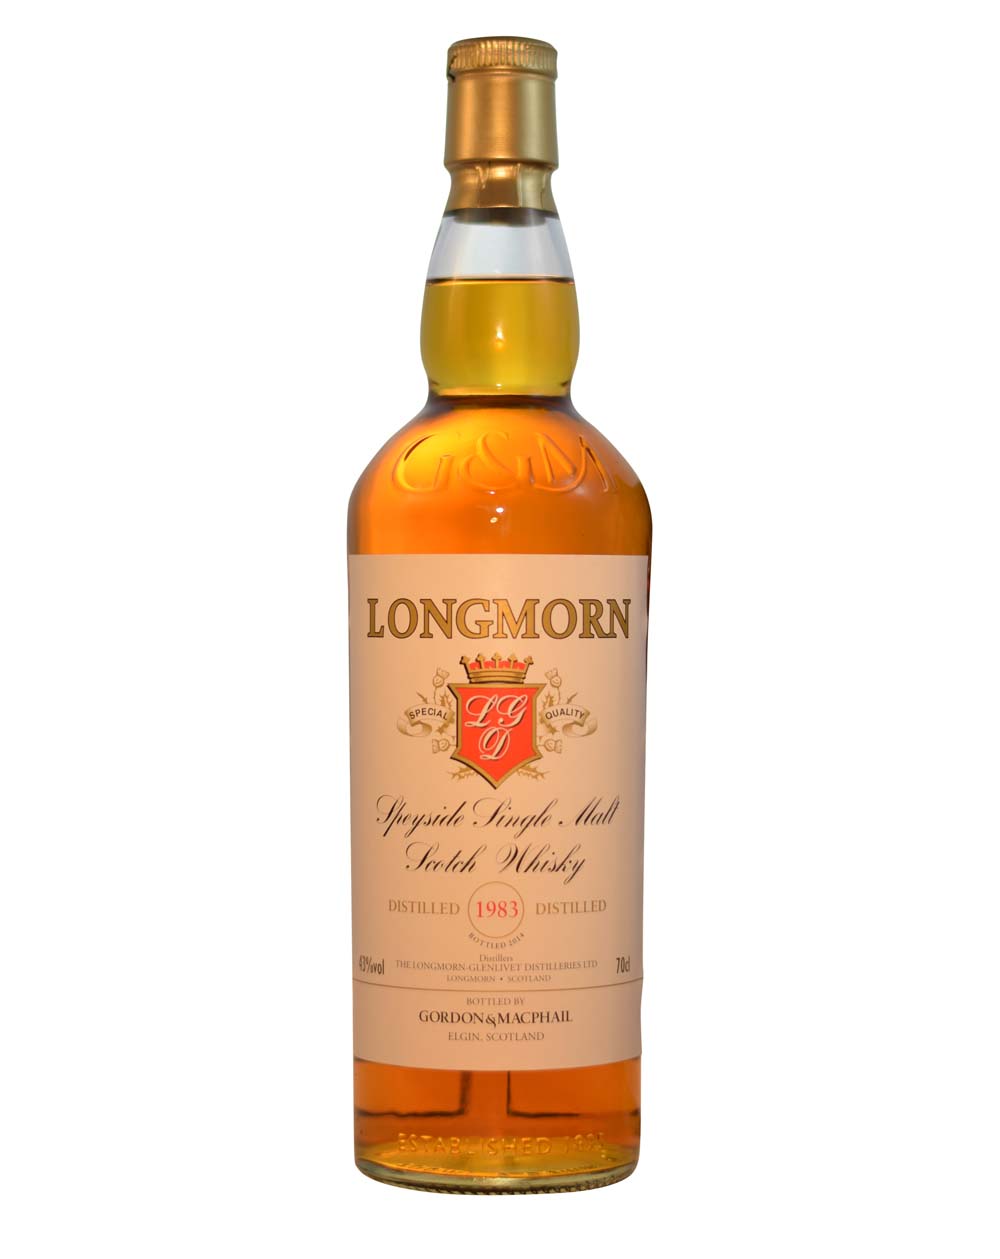 Longmorn 1983 - 2014 Gordon and Macphail Musthave Malts MHM